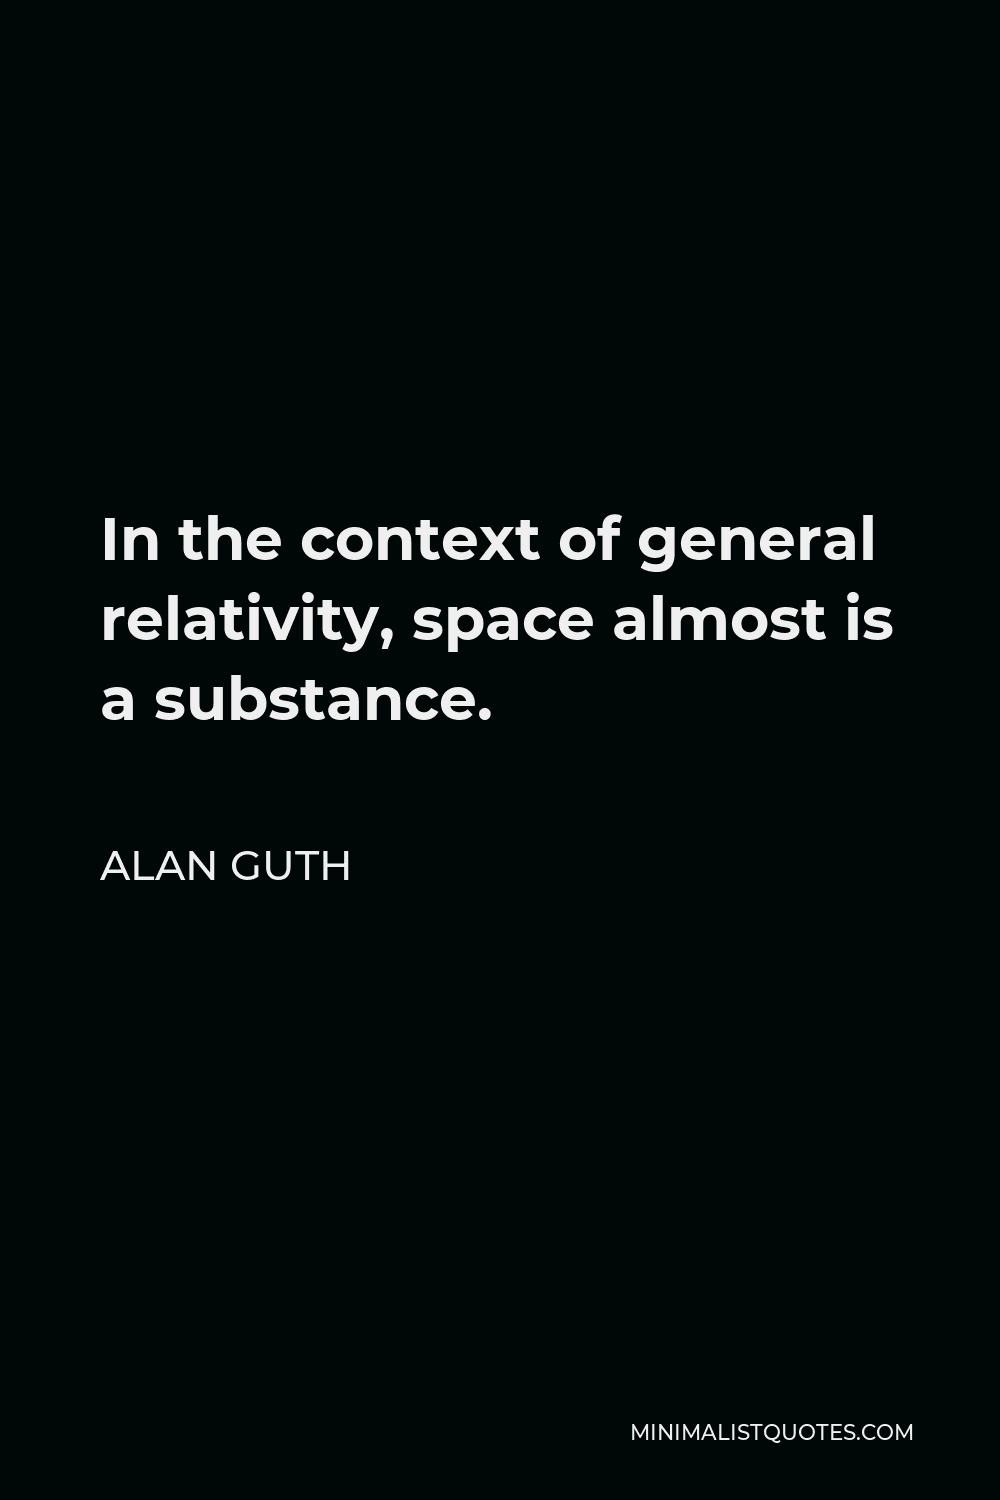 Alan Guth Quote - In the context of general relativity, space almost is a substance.